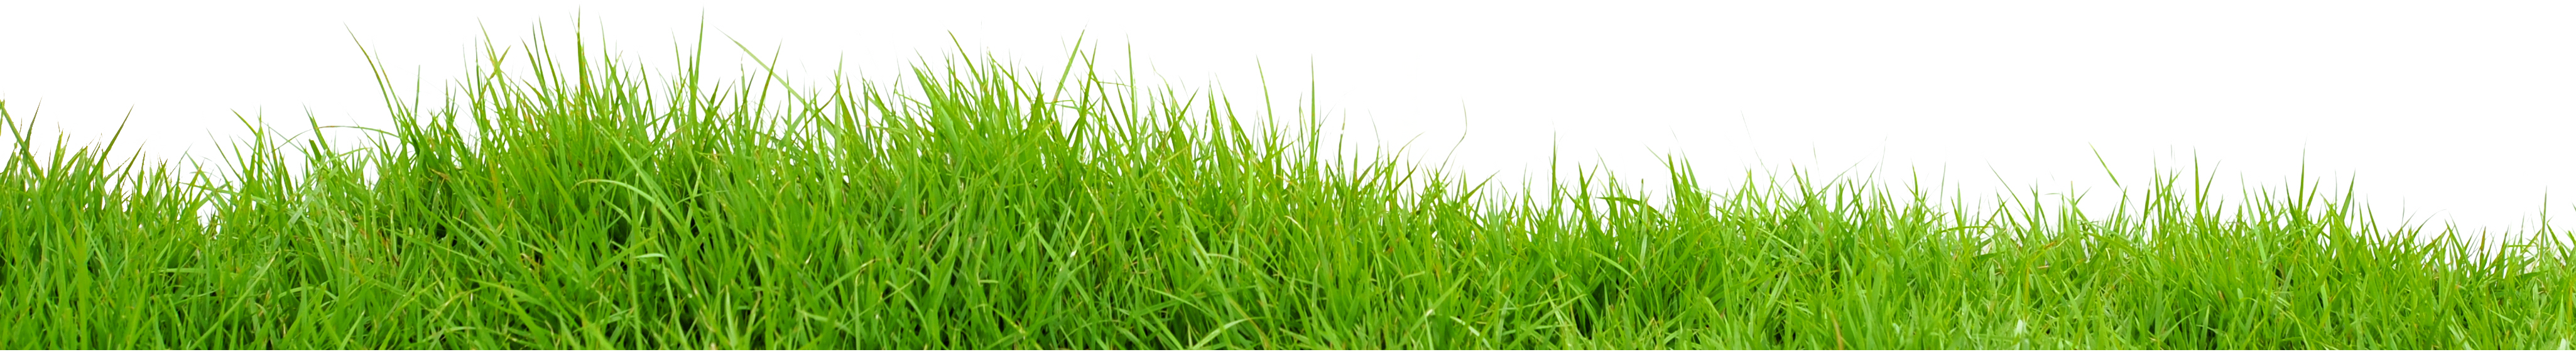 Field Grass Green Landscape HD Image Free PNG Image